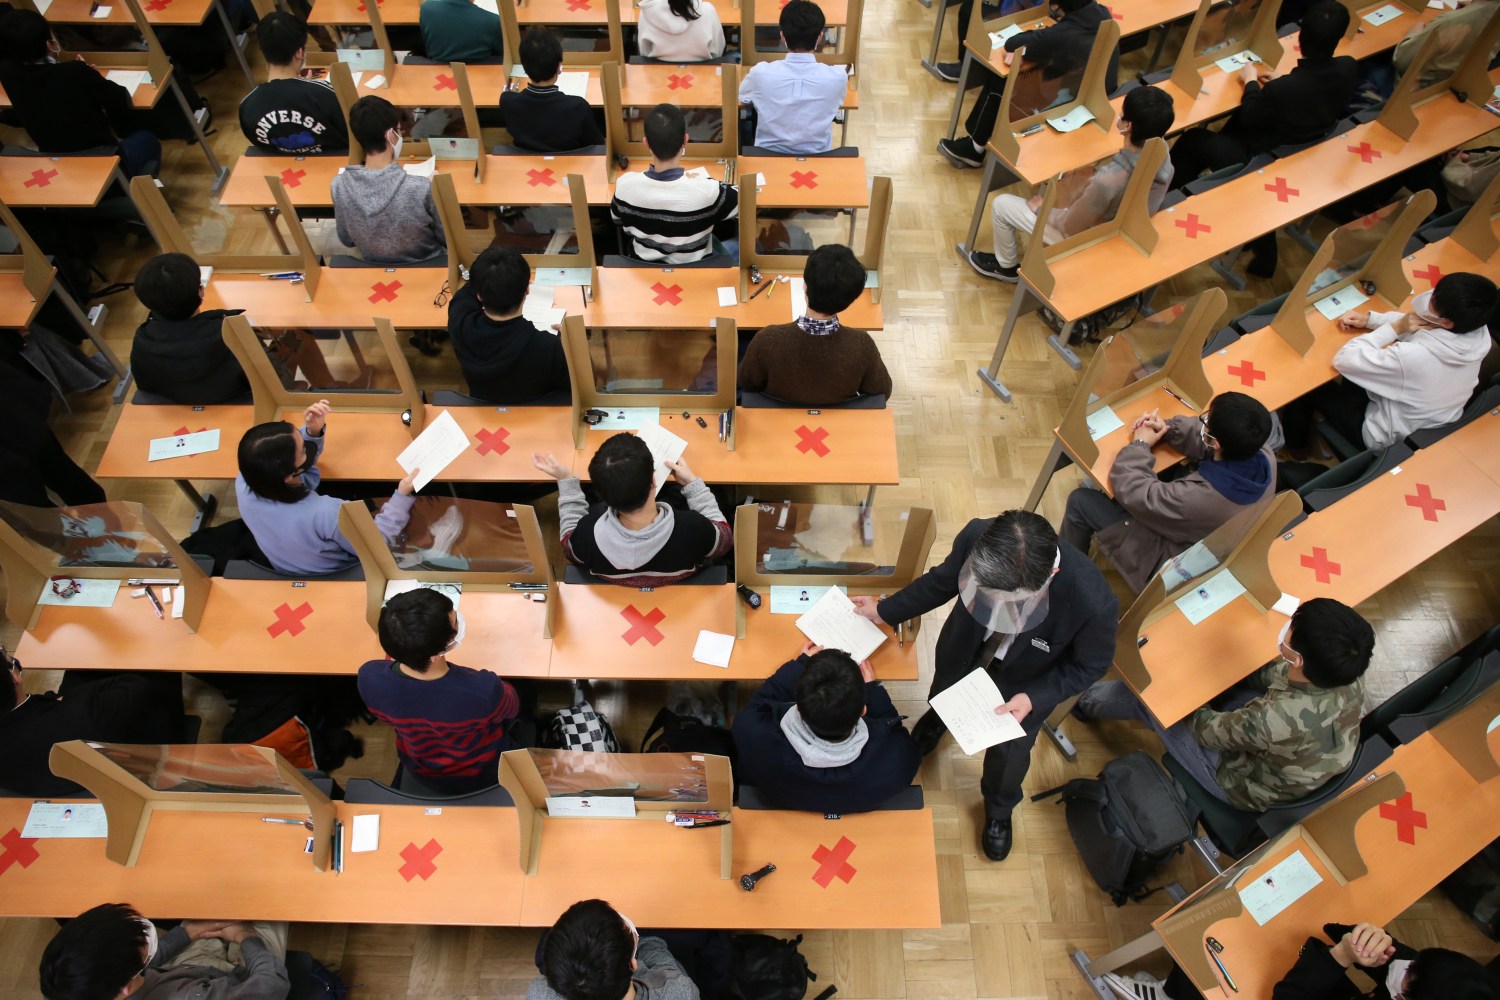 The secondary examination of the national and public universities starts at the Tokyo University in Bunkyo Ward, Tokyo on February 25, 2021. The examinees wearing face masks maintain social distance while testing amid a pandemic of the new coronavirus COVID-19. The examiners wear face shields and transparent partitions are set on each desk.   ( The Yomiuri Shimbun via AP Images )